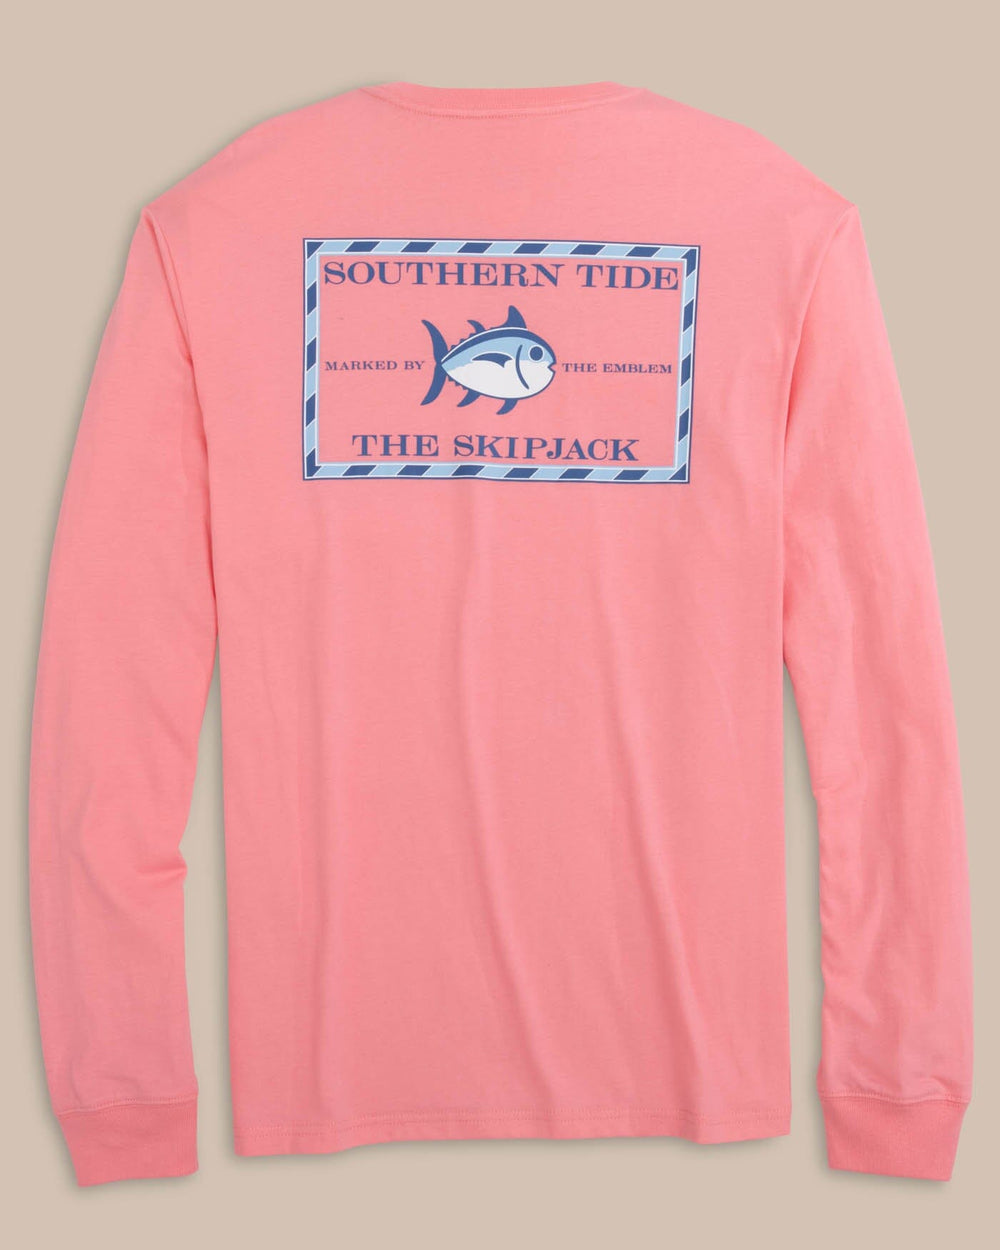 The back view of the Southern Tide Long Sleeve Original Skipjack T-shirt by Southern Tide - Geranium Pink